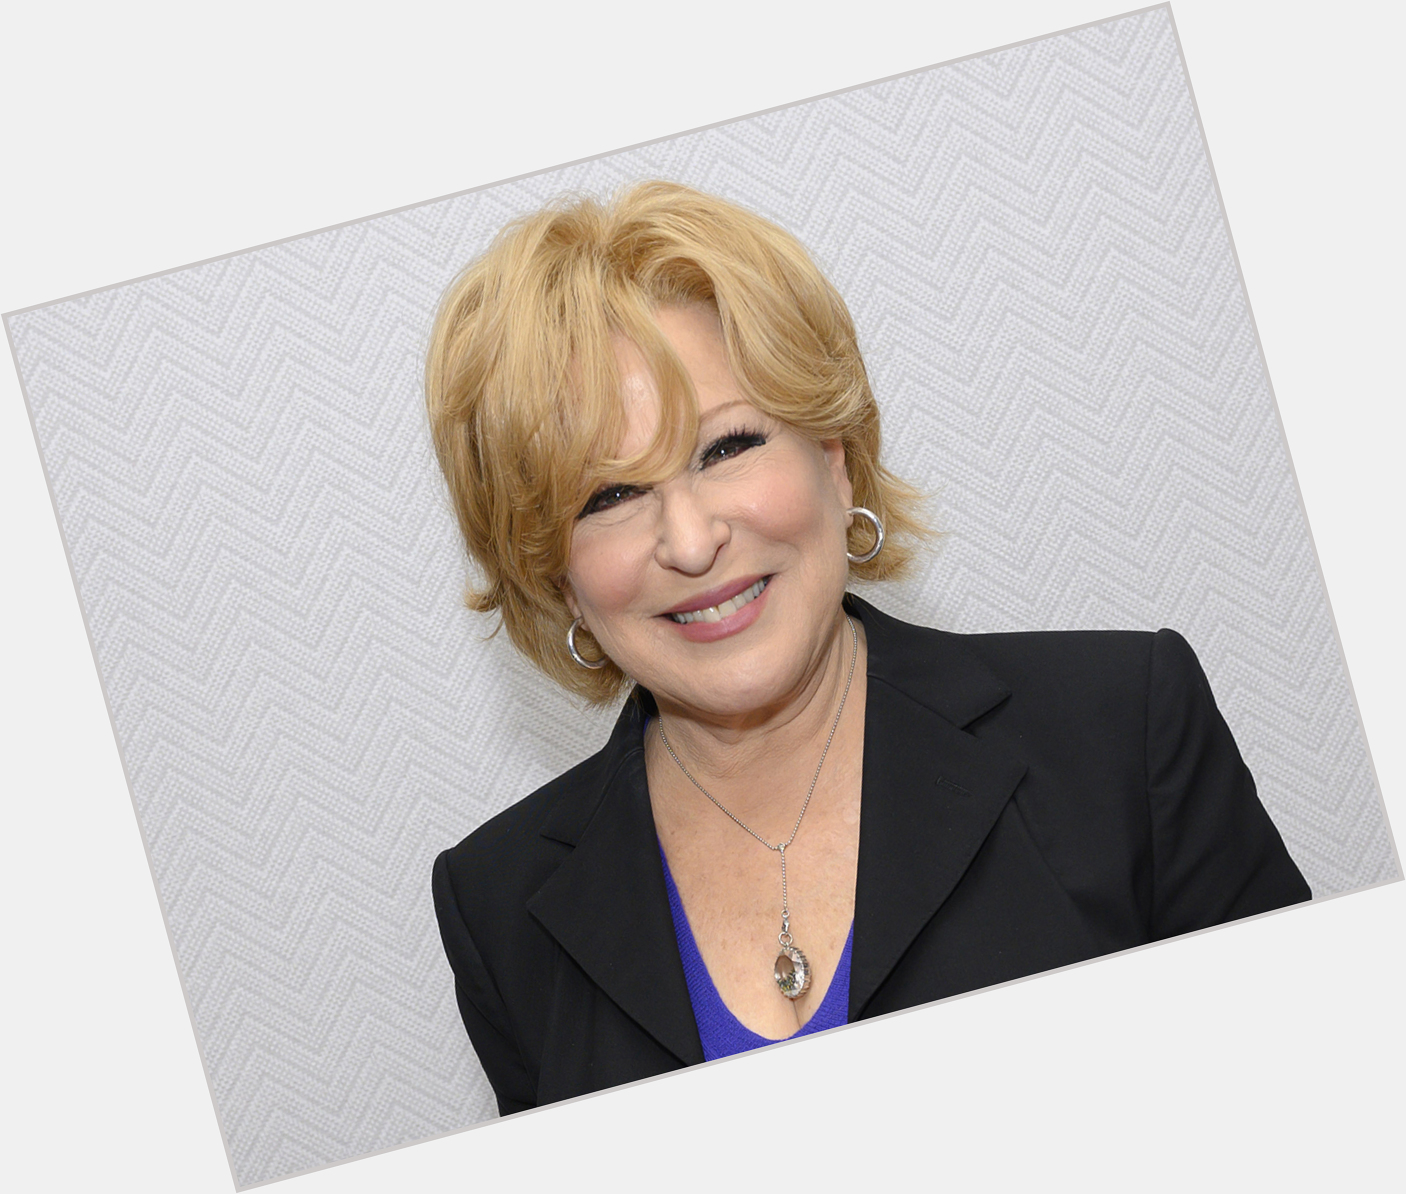 Happy Birthday to Bette Midler who turns 75 today! 